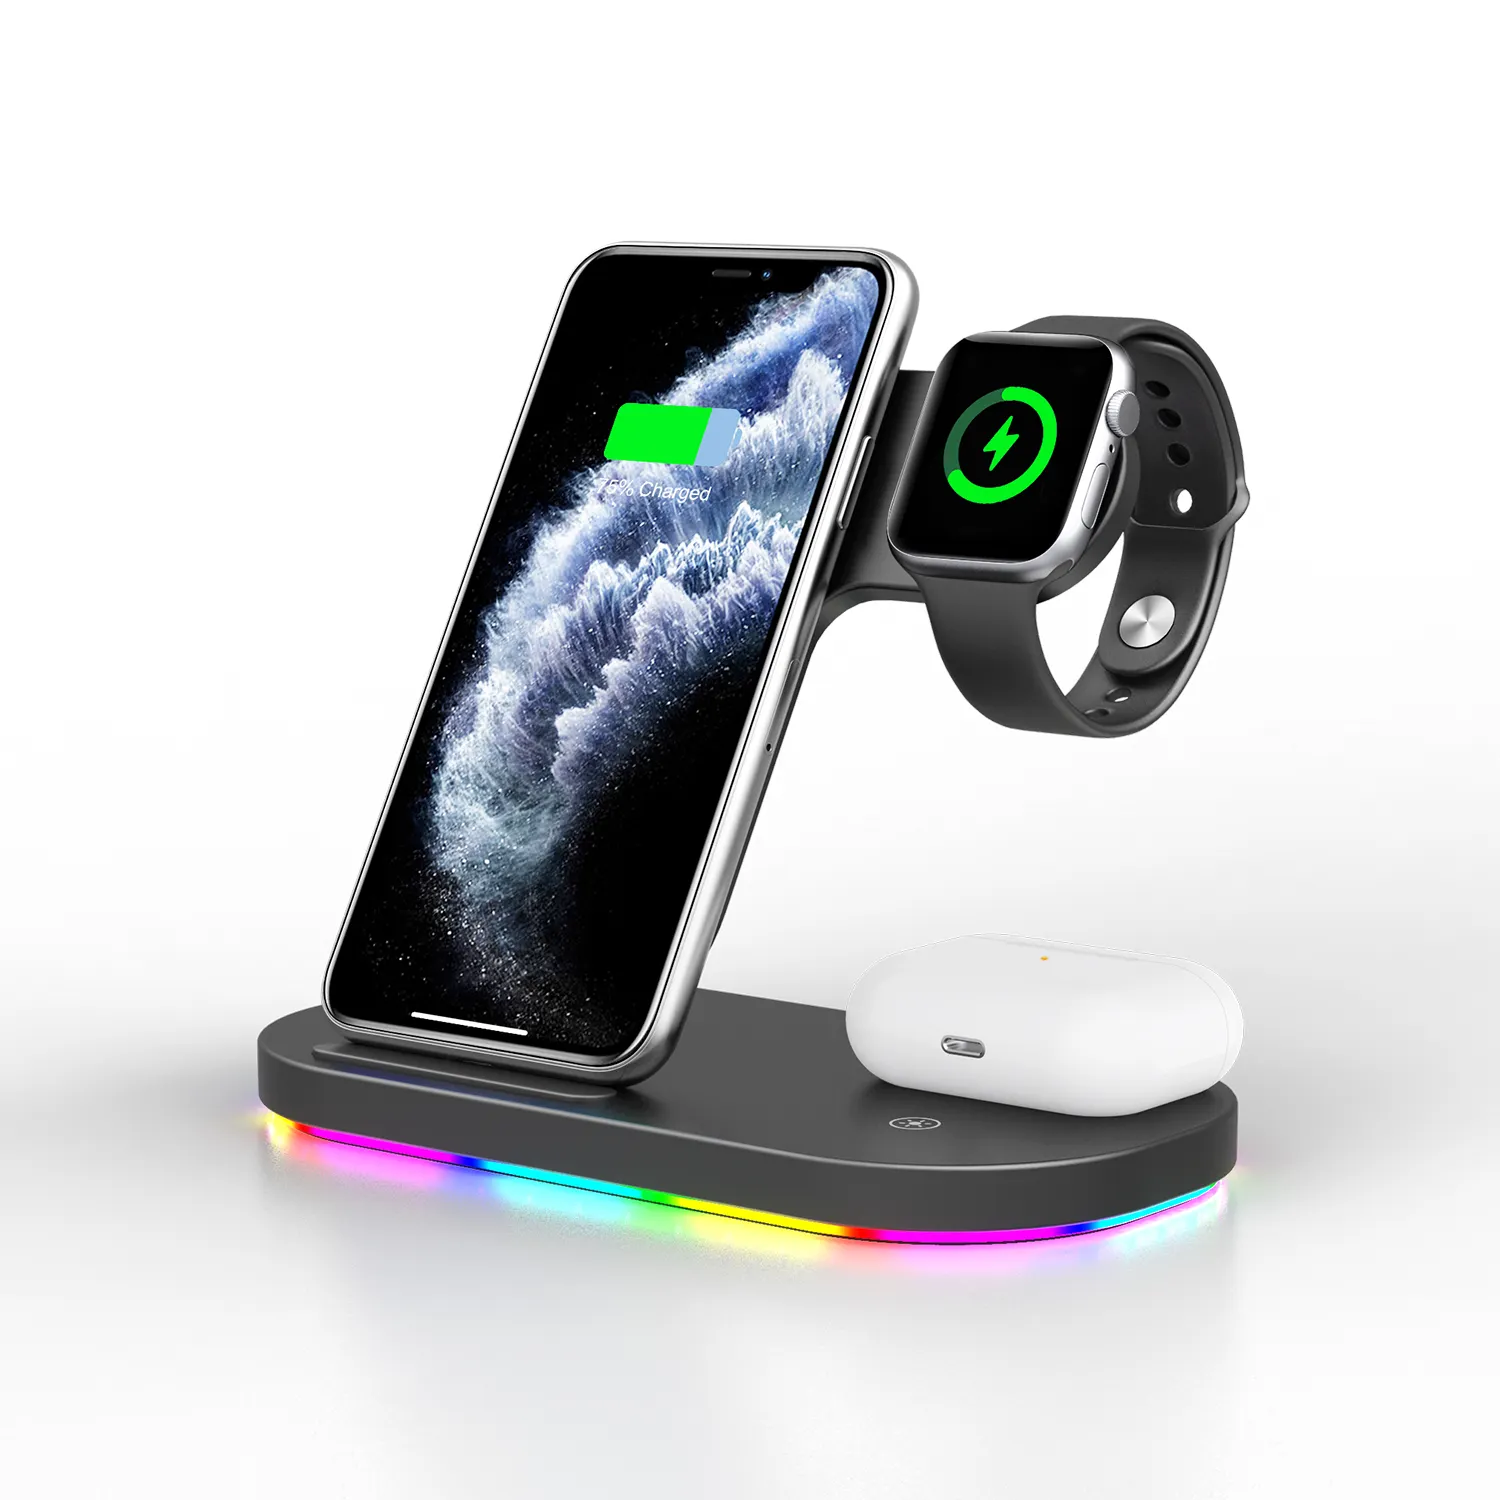 Max High Quality Guany Z7S 15W Max Fast 3 IN 1 Universal Wireless Charger Charging Station For Home Work Office Work